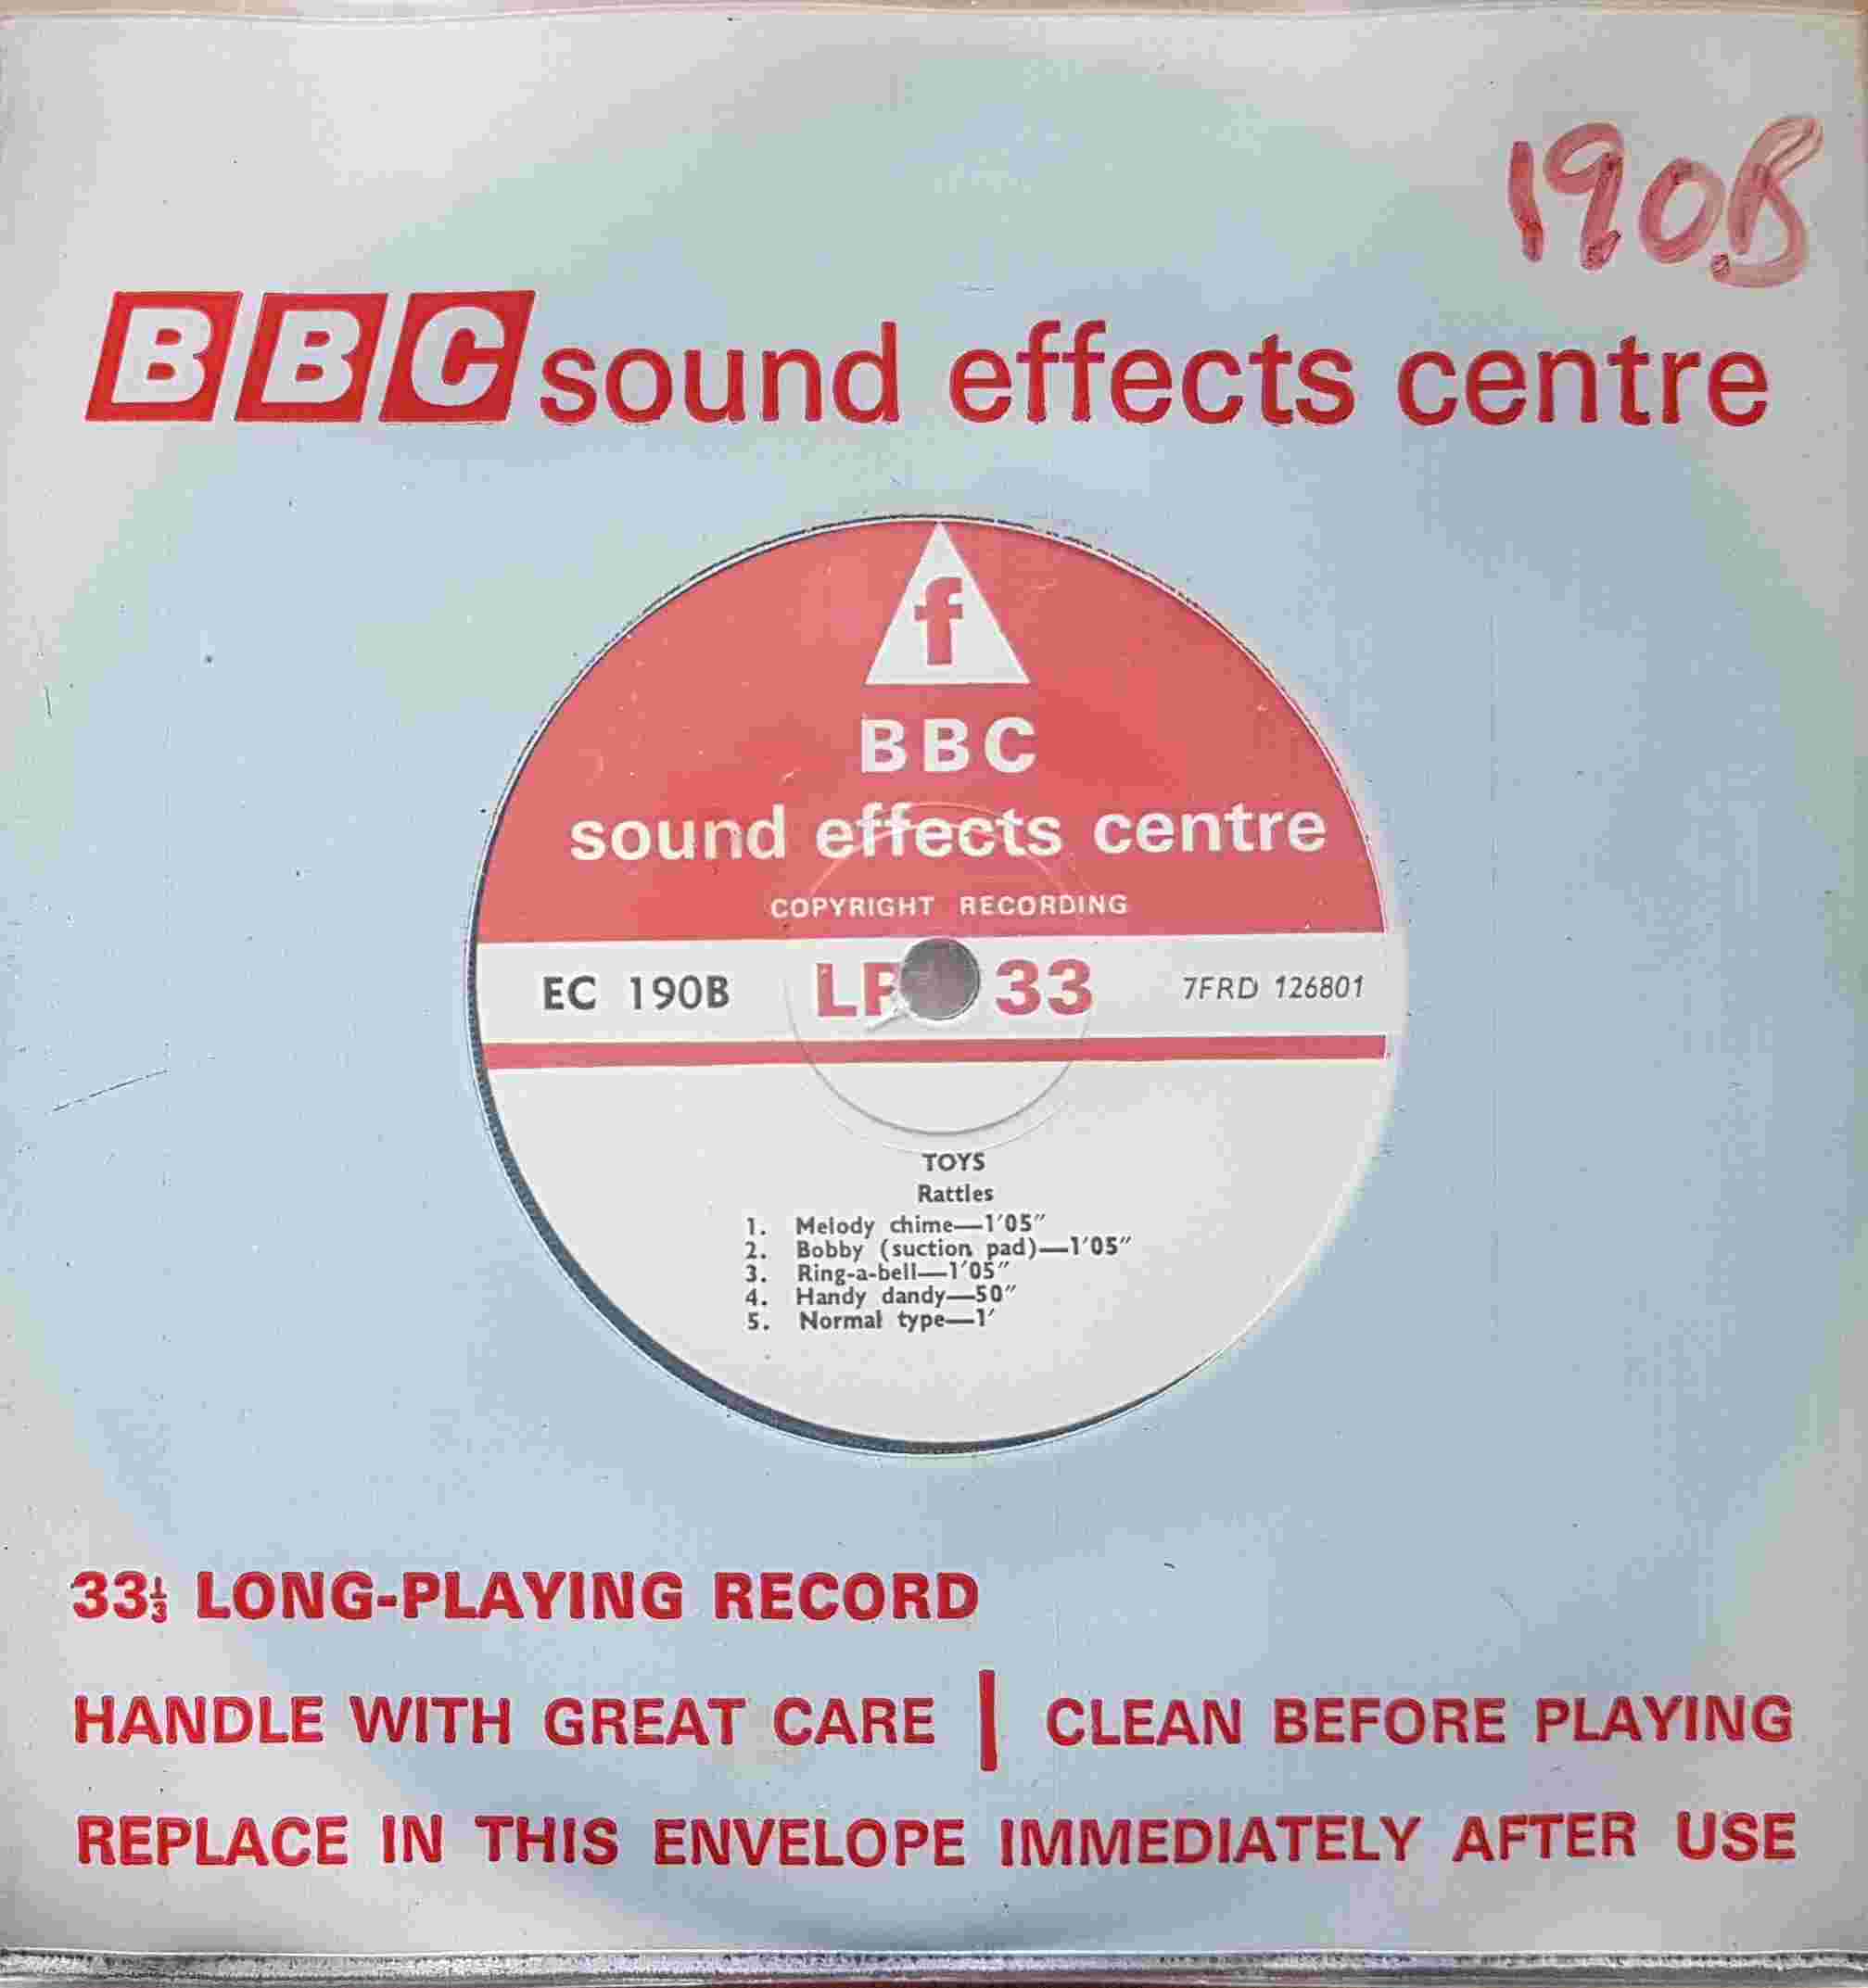 Picture of EC 190B Toys by artist Not registered from the BBC singles - Records and Tapes library